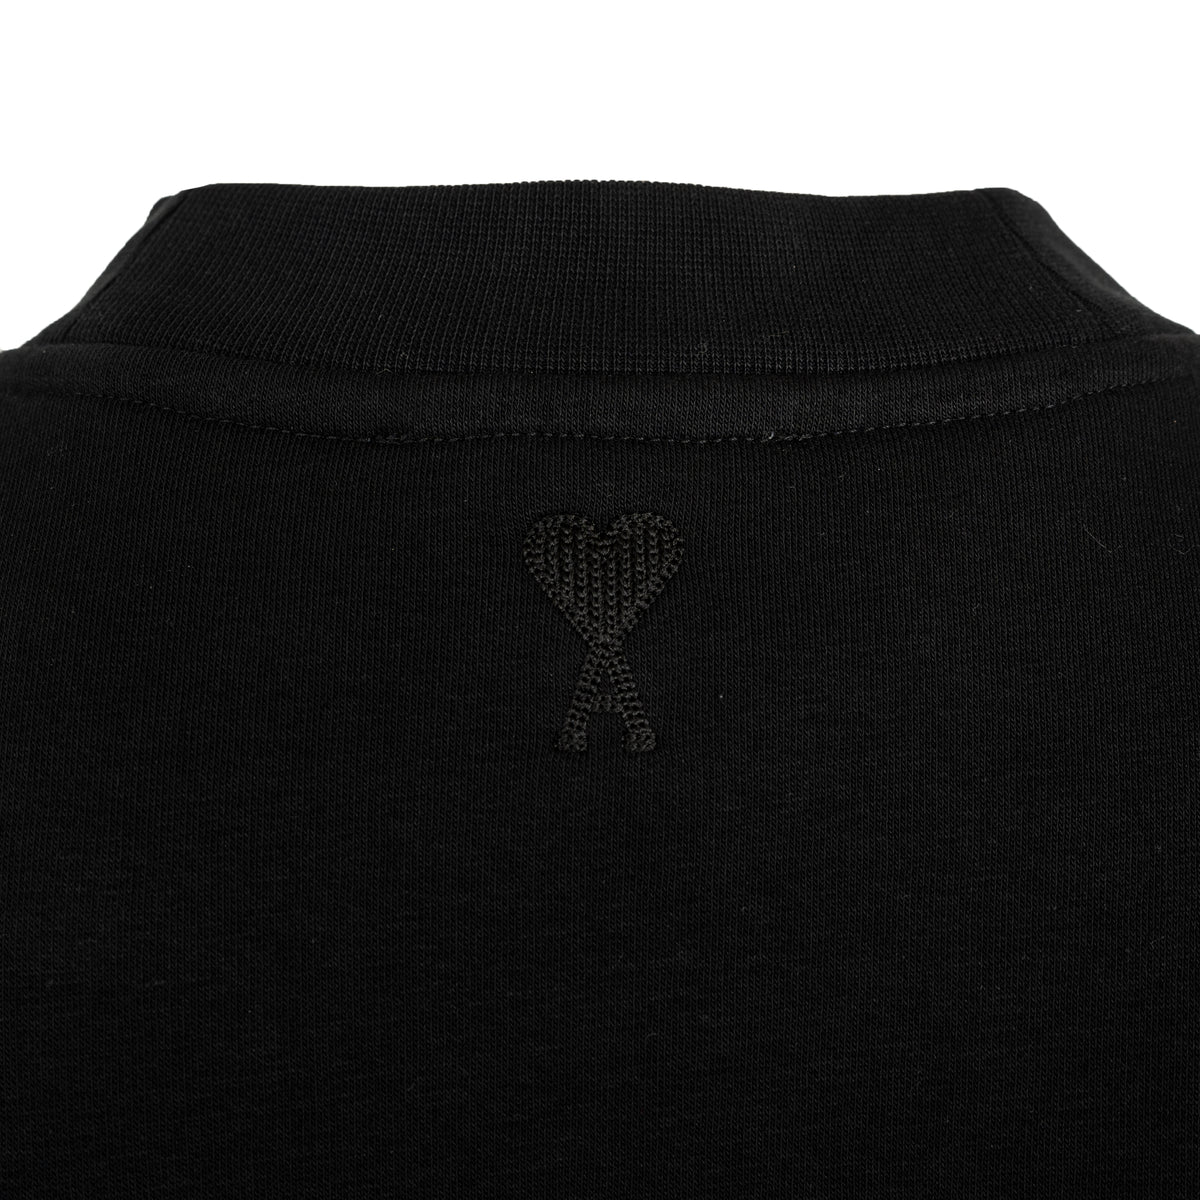 Load image into Gallery viewer, AMI Black Patch Logo Sweat
